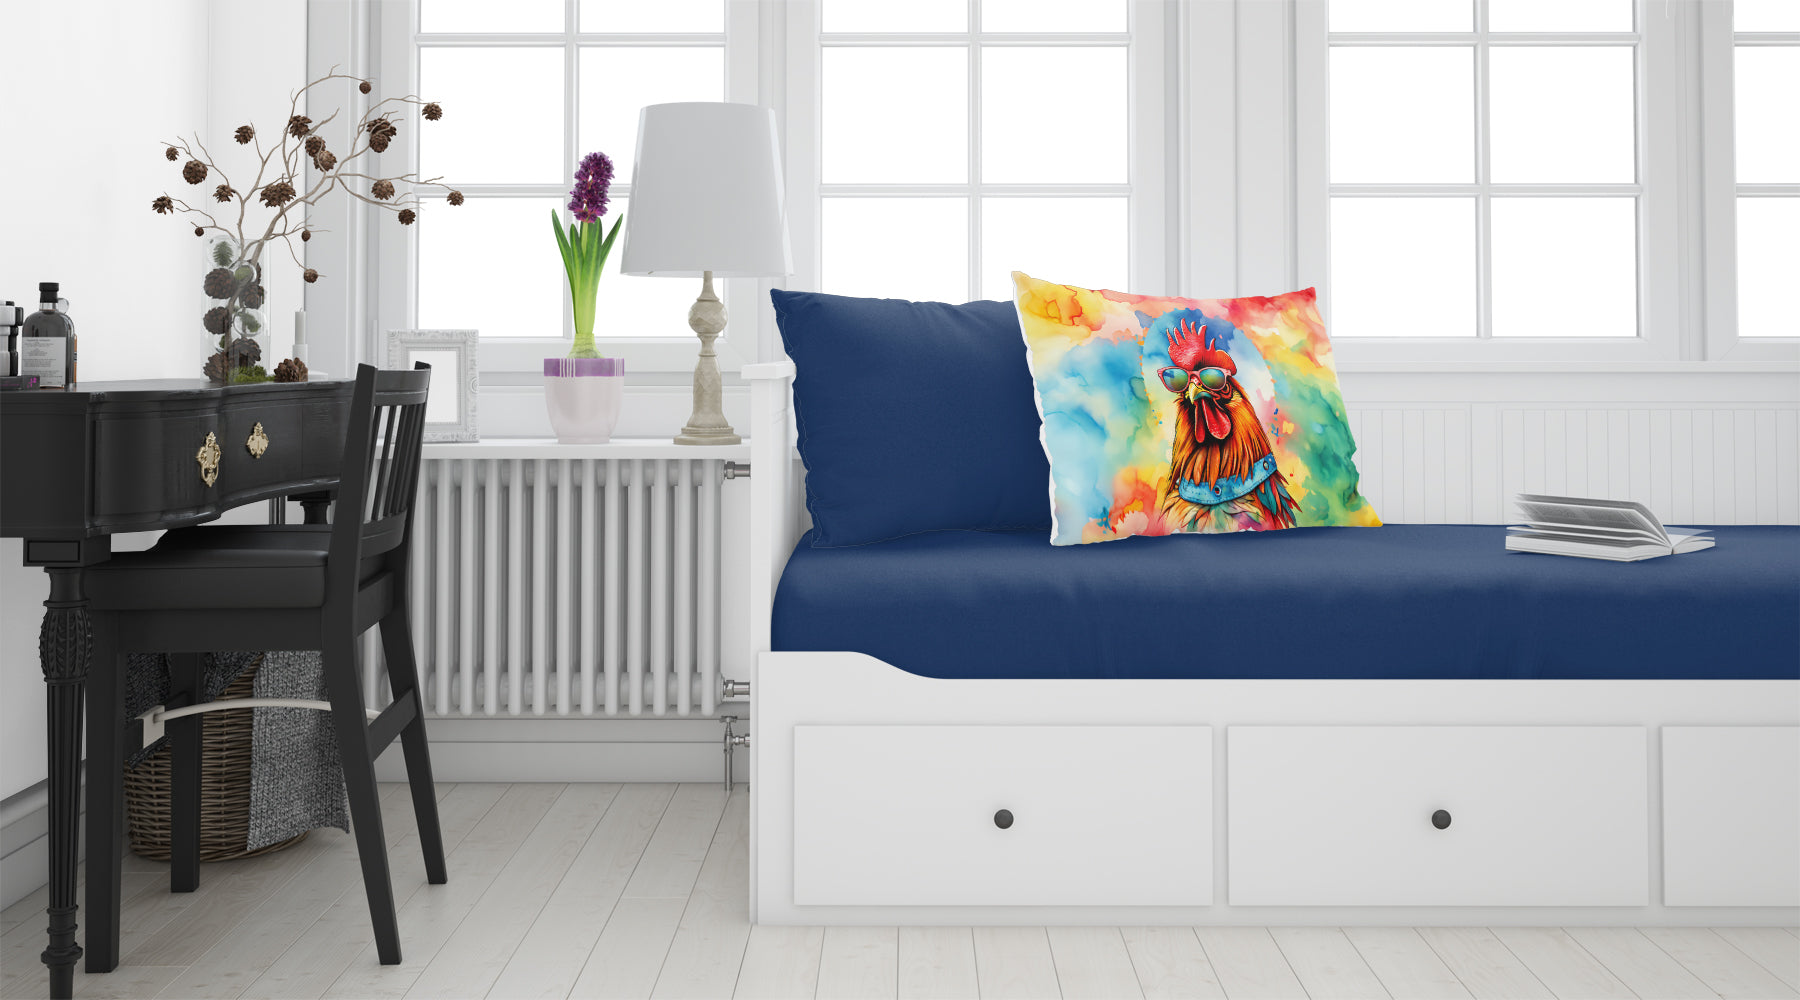 Buy this Hippie Animal Red Rooster Standard Pillowcase